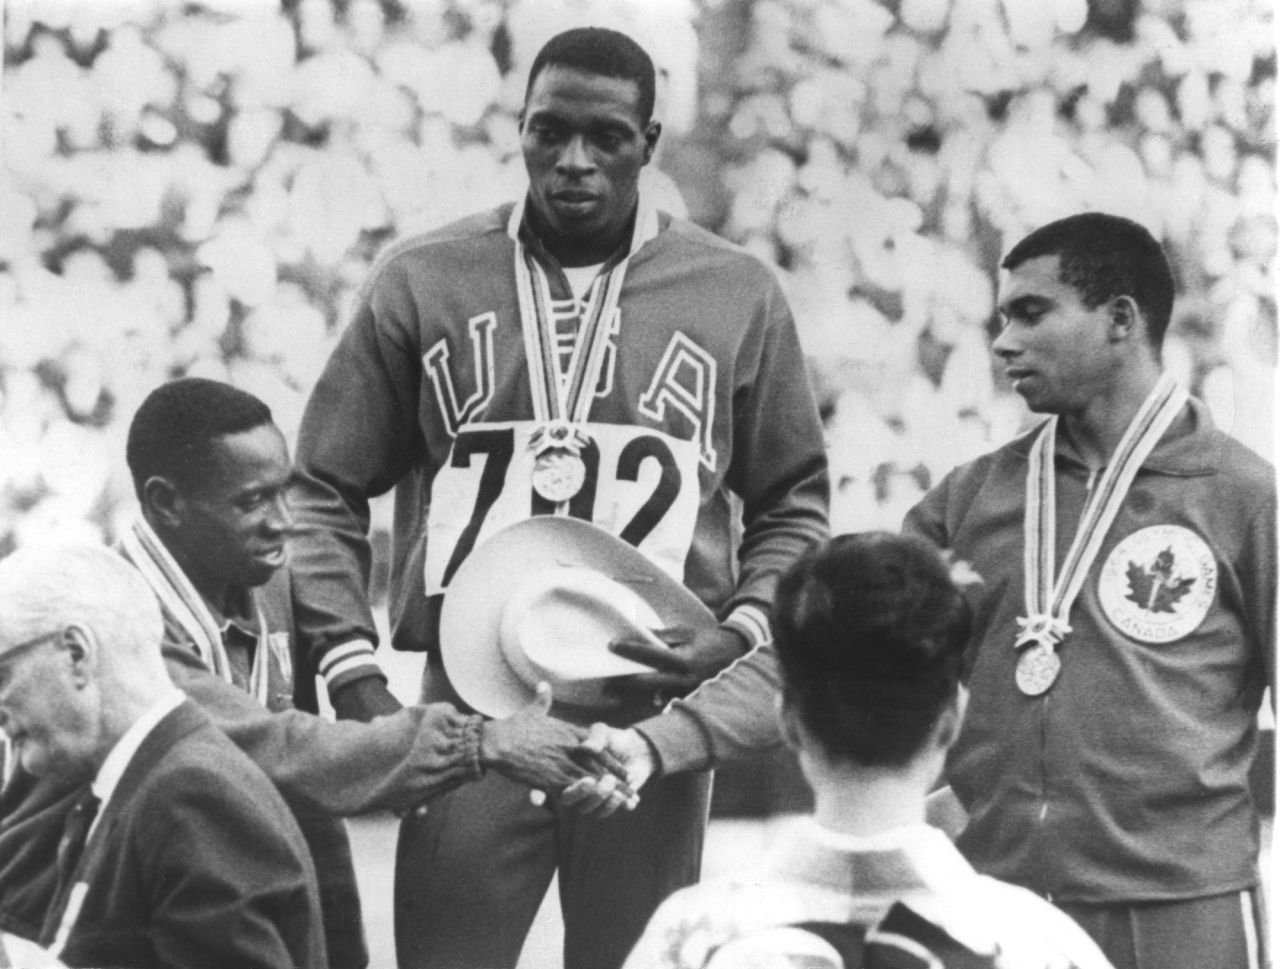 October 15, 1964: Robert Hayes of the U.S. (center) stands on the podium after receiving his gold medal for winning the men's 100 meter final. Silver medal winner Enrique Figuerola of Cuba (left) congratulates Harry Jerome of Canada, who came third. Hayes' time of 10.0 seconds was a new Olympic record. 